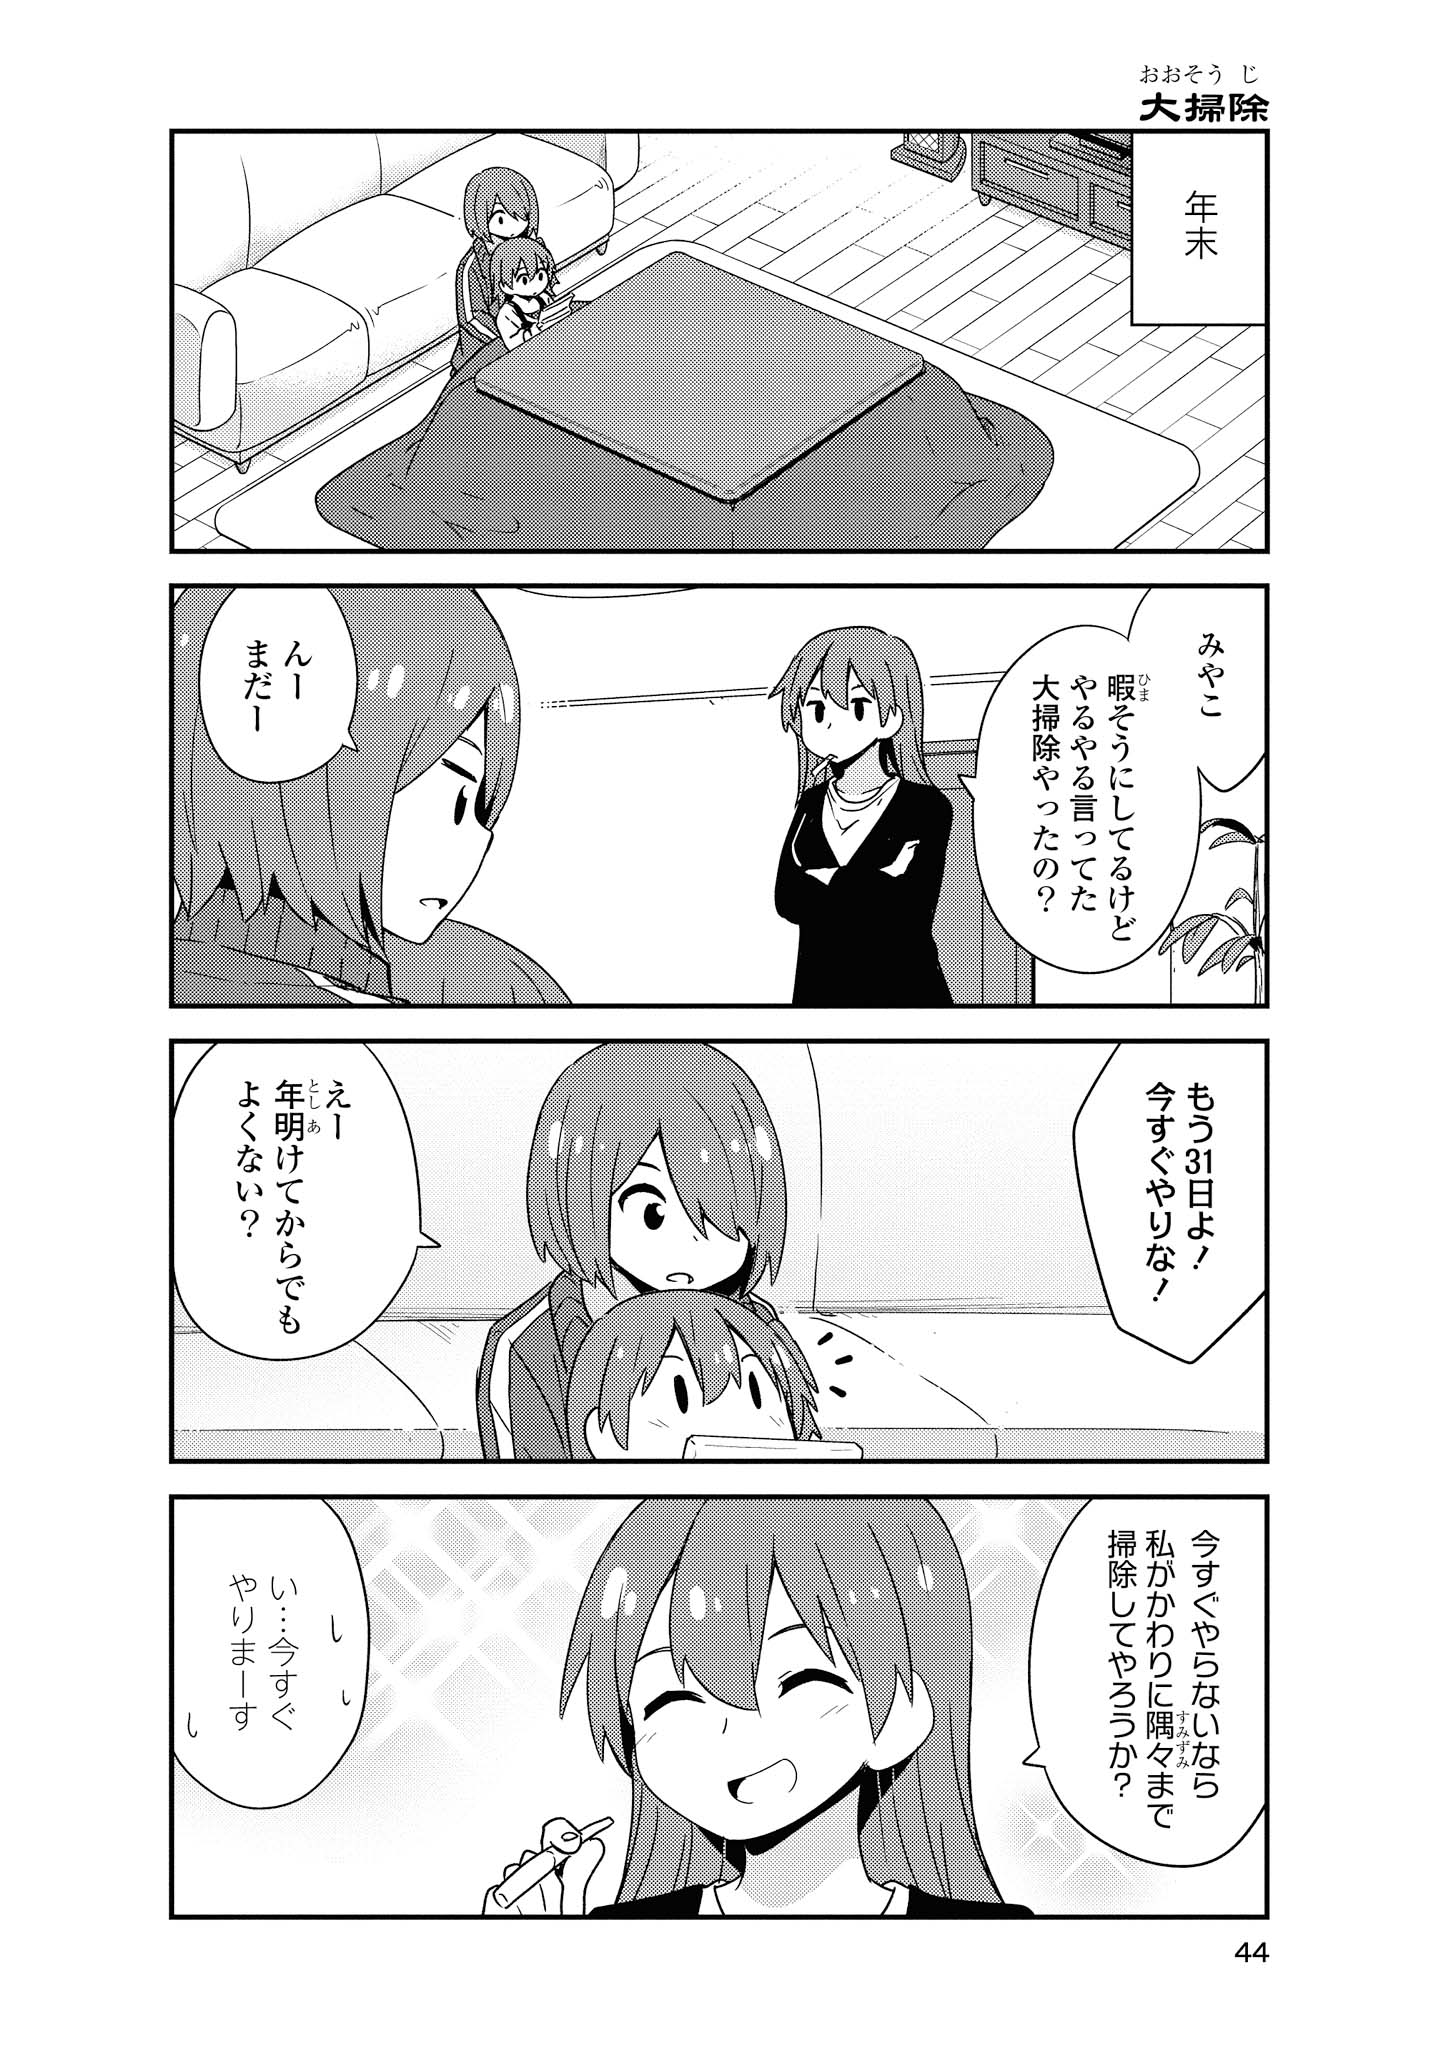 Wataten! An Angel Flew Down to Me 私に天使が舞い降りた！ 第46話 - Page 2